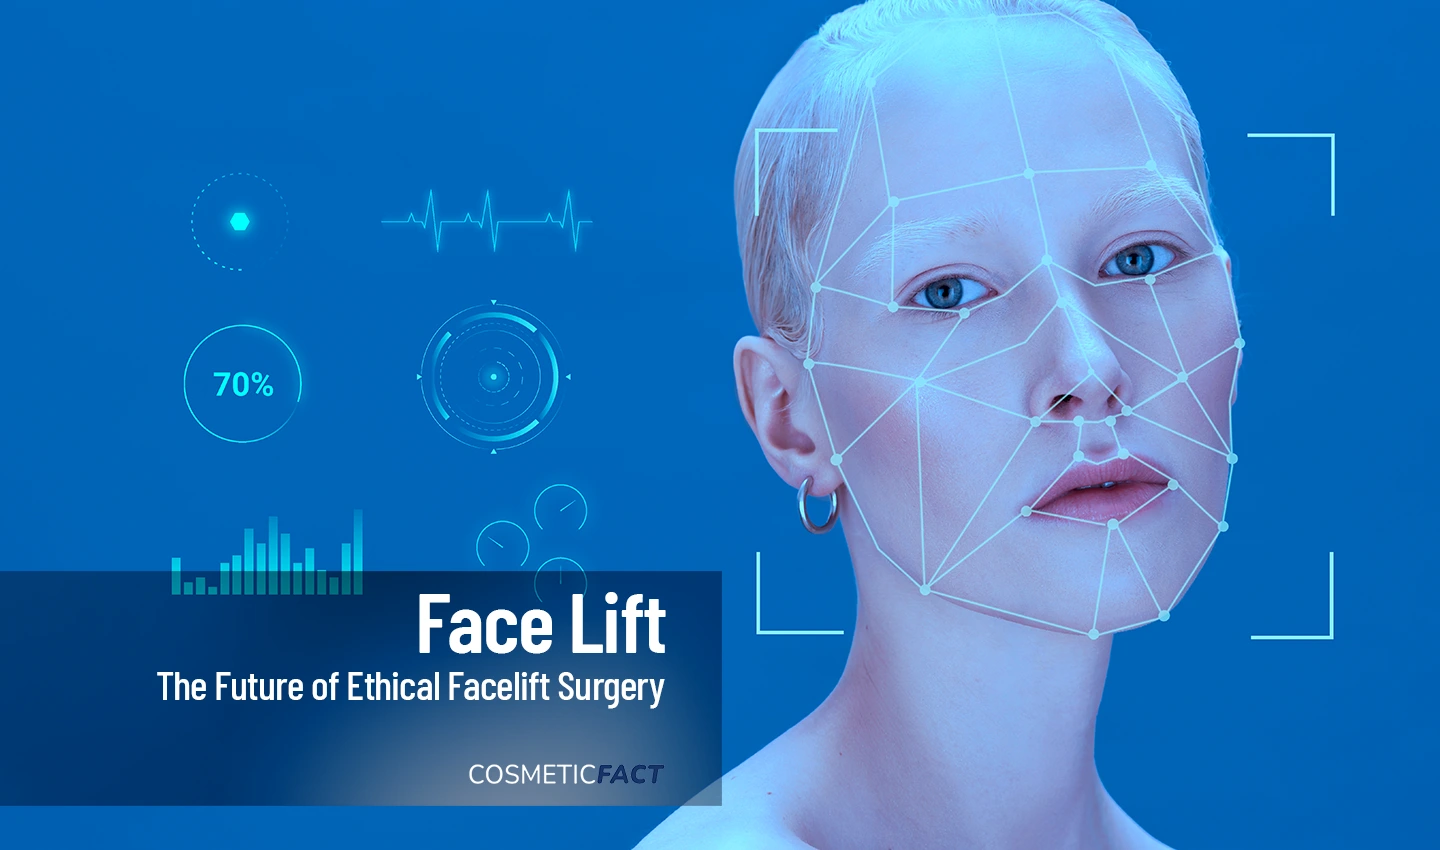 Woman showcasing natural-looking results of ethical facelift surgery from different angles